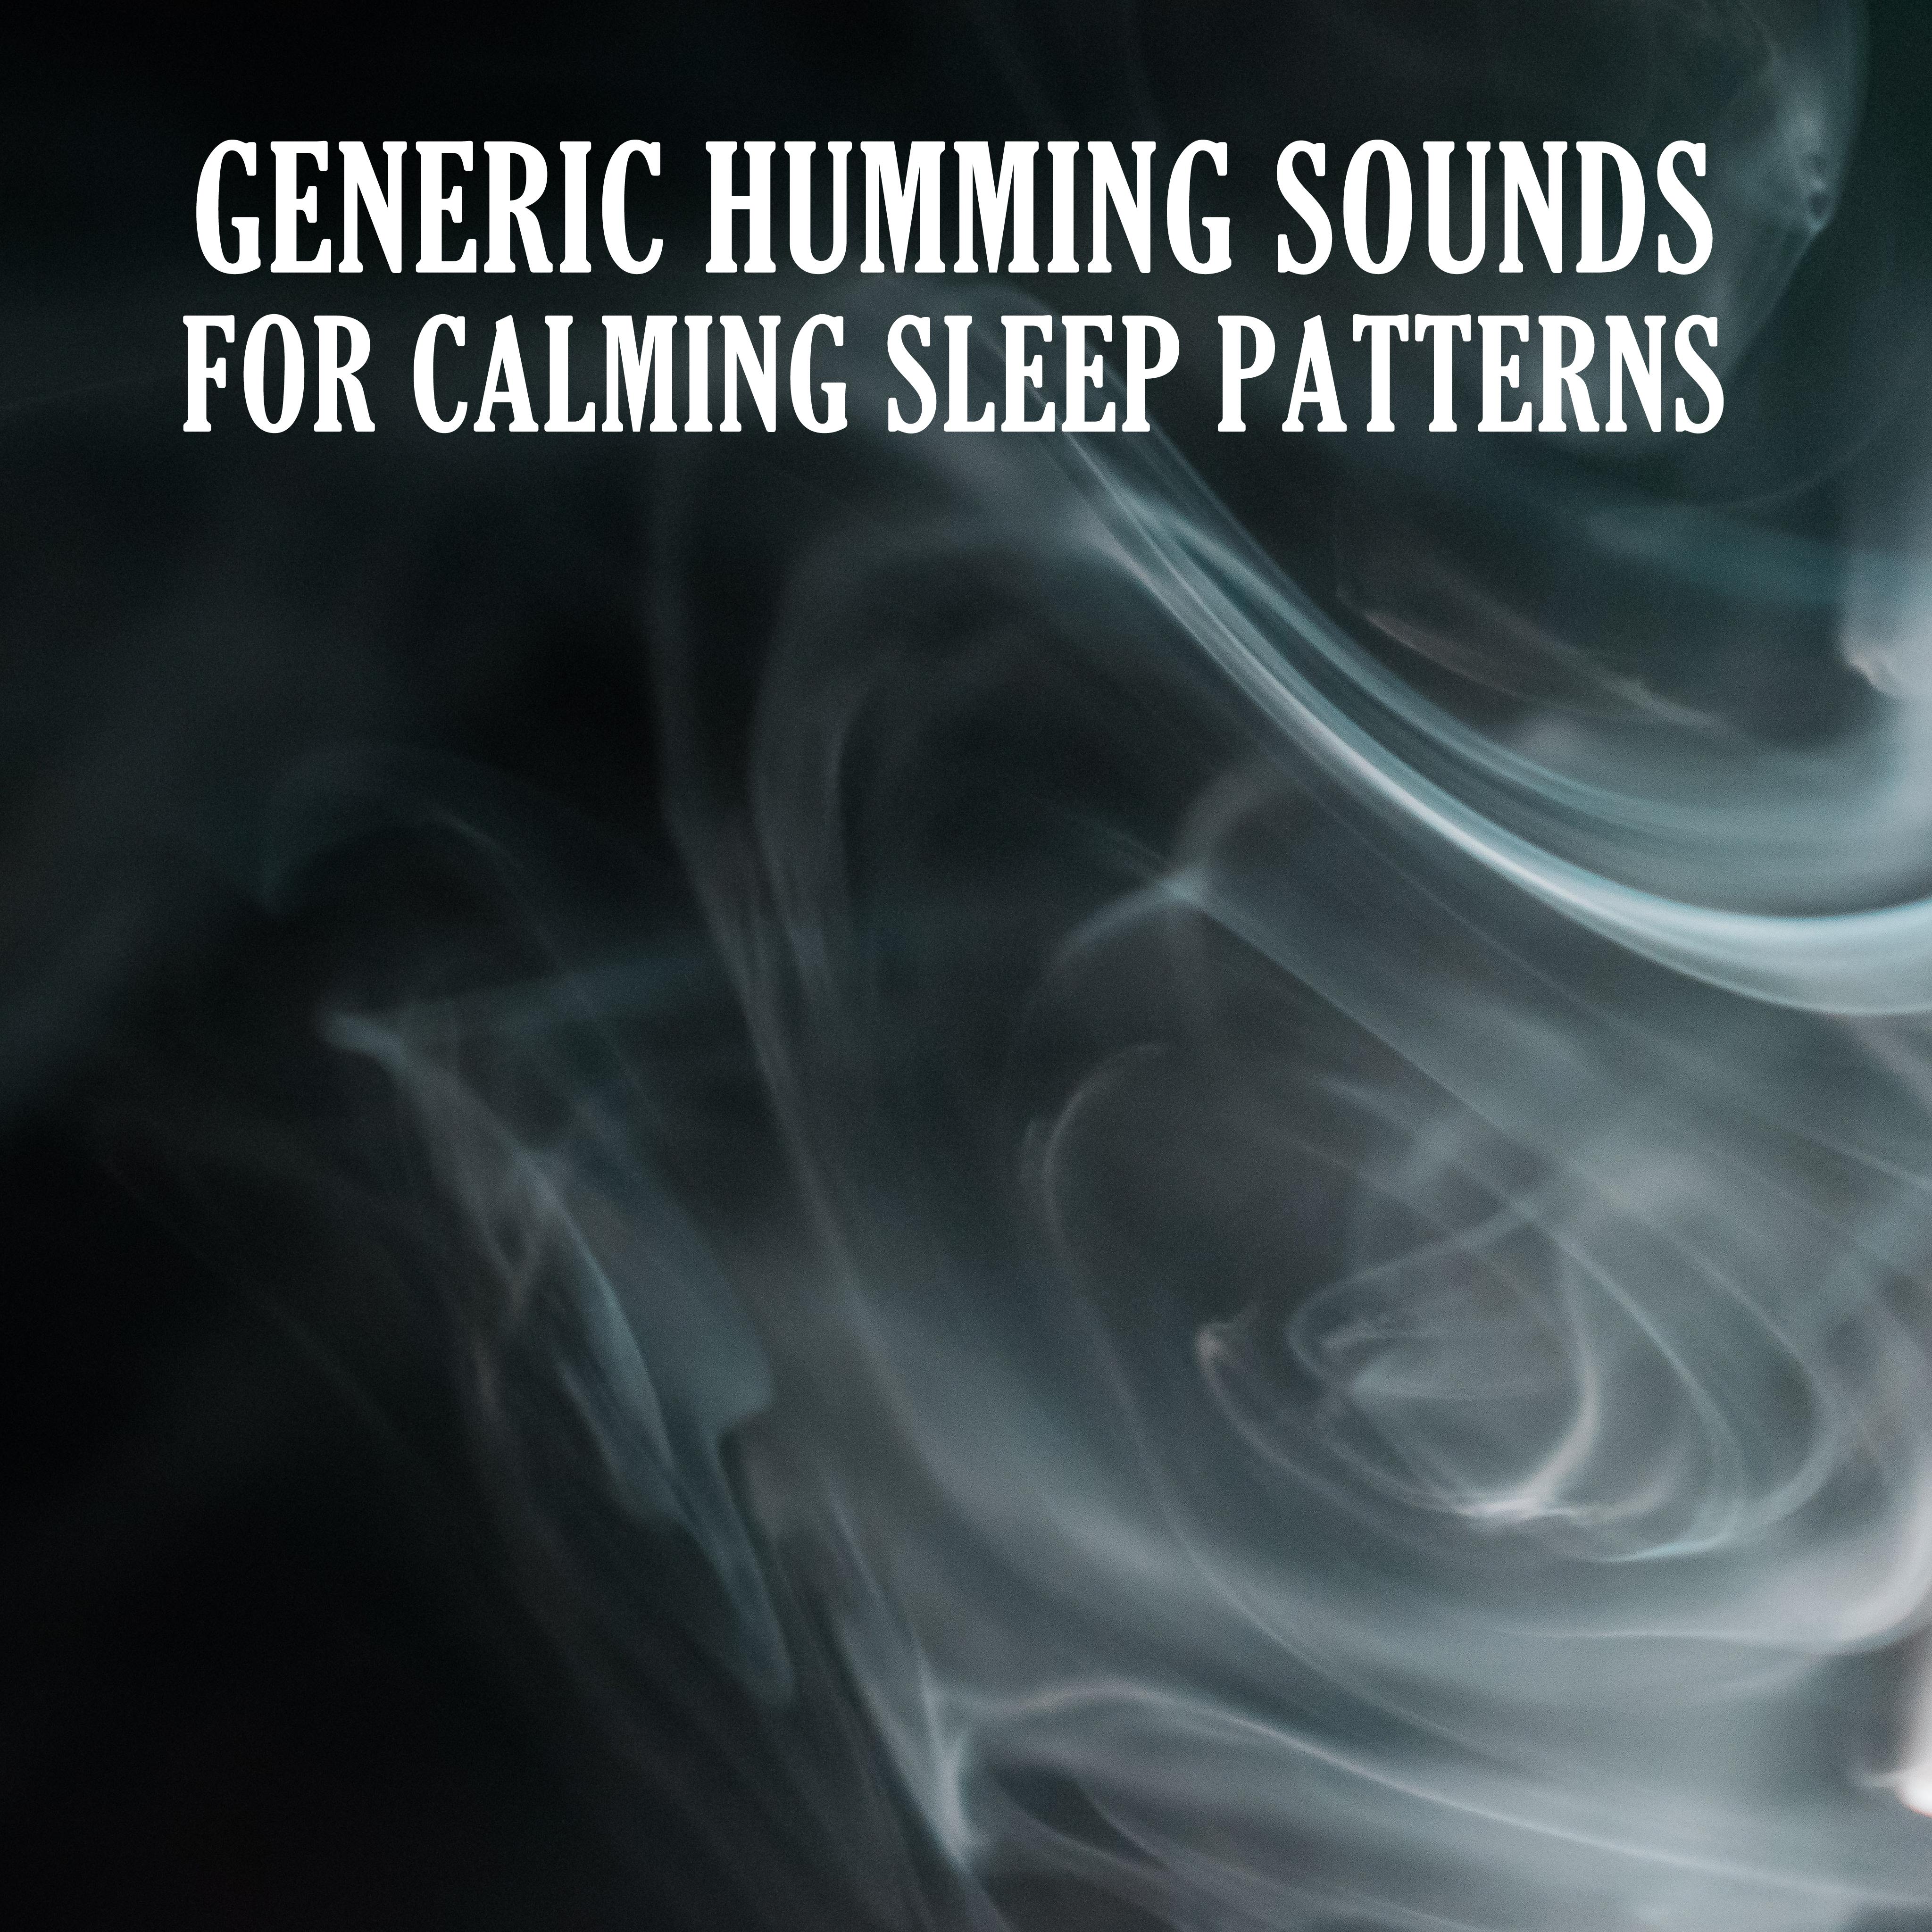 10 Generic Humming Sounds for Calming Sleep Patterns